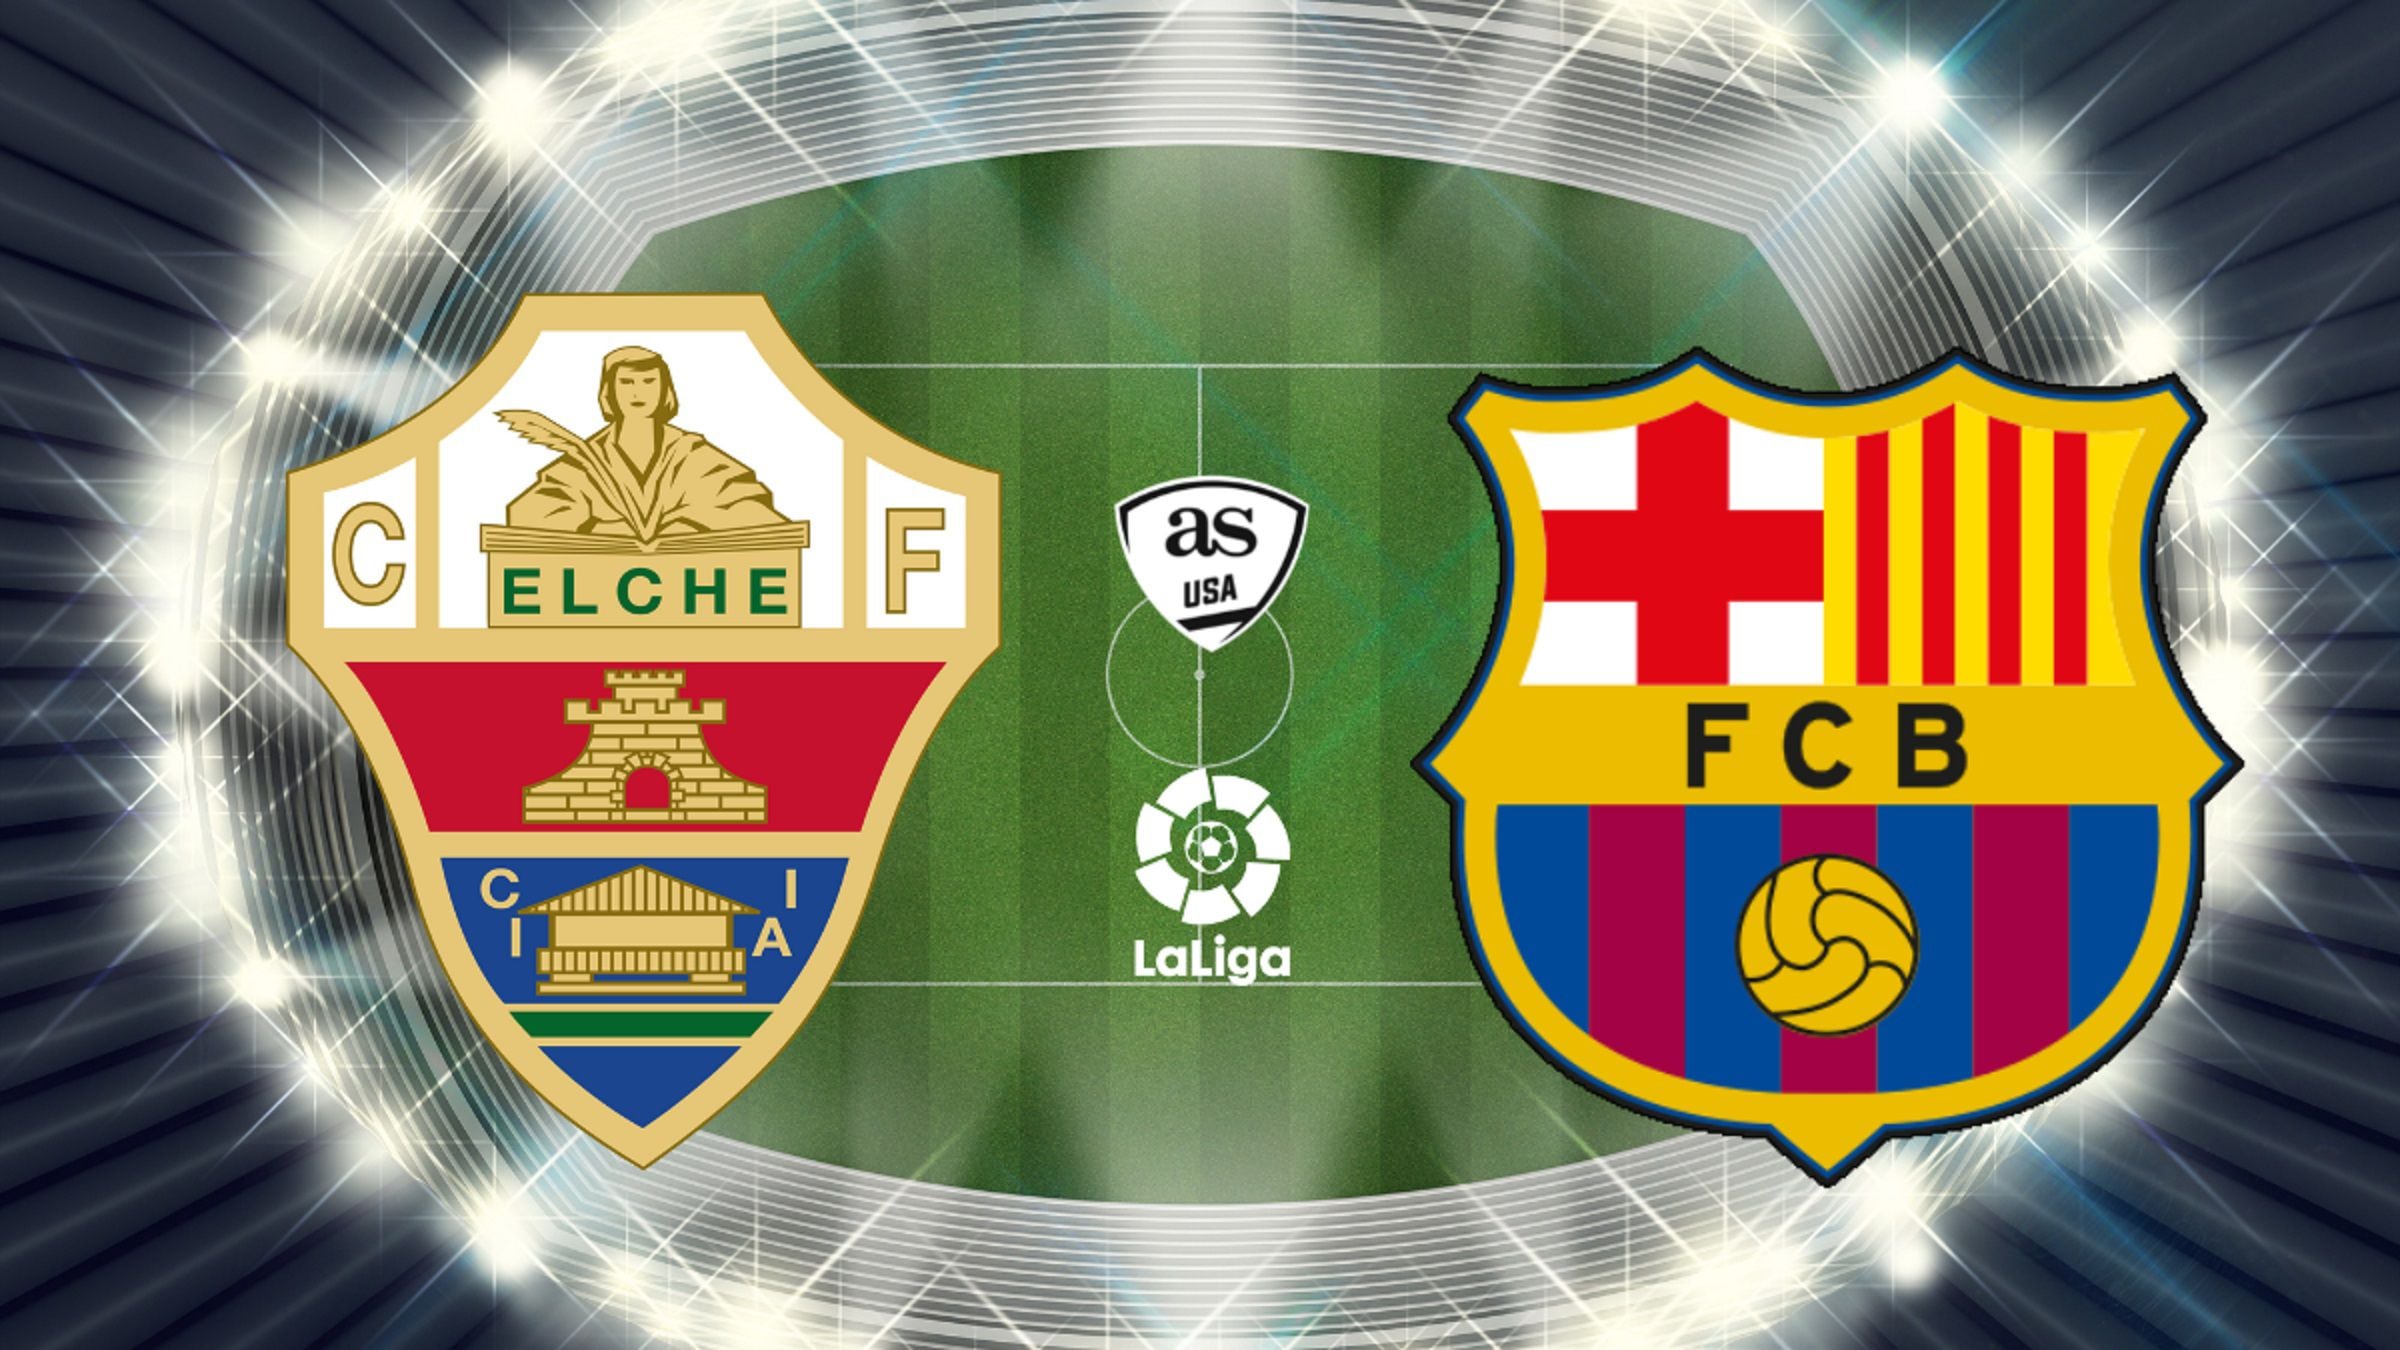 Hello and welcome to Elche vs Barcelona!